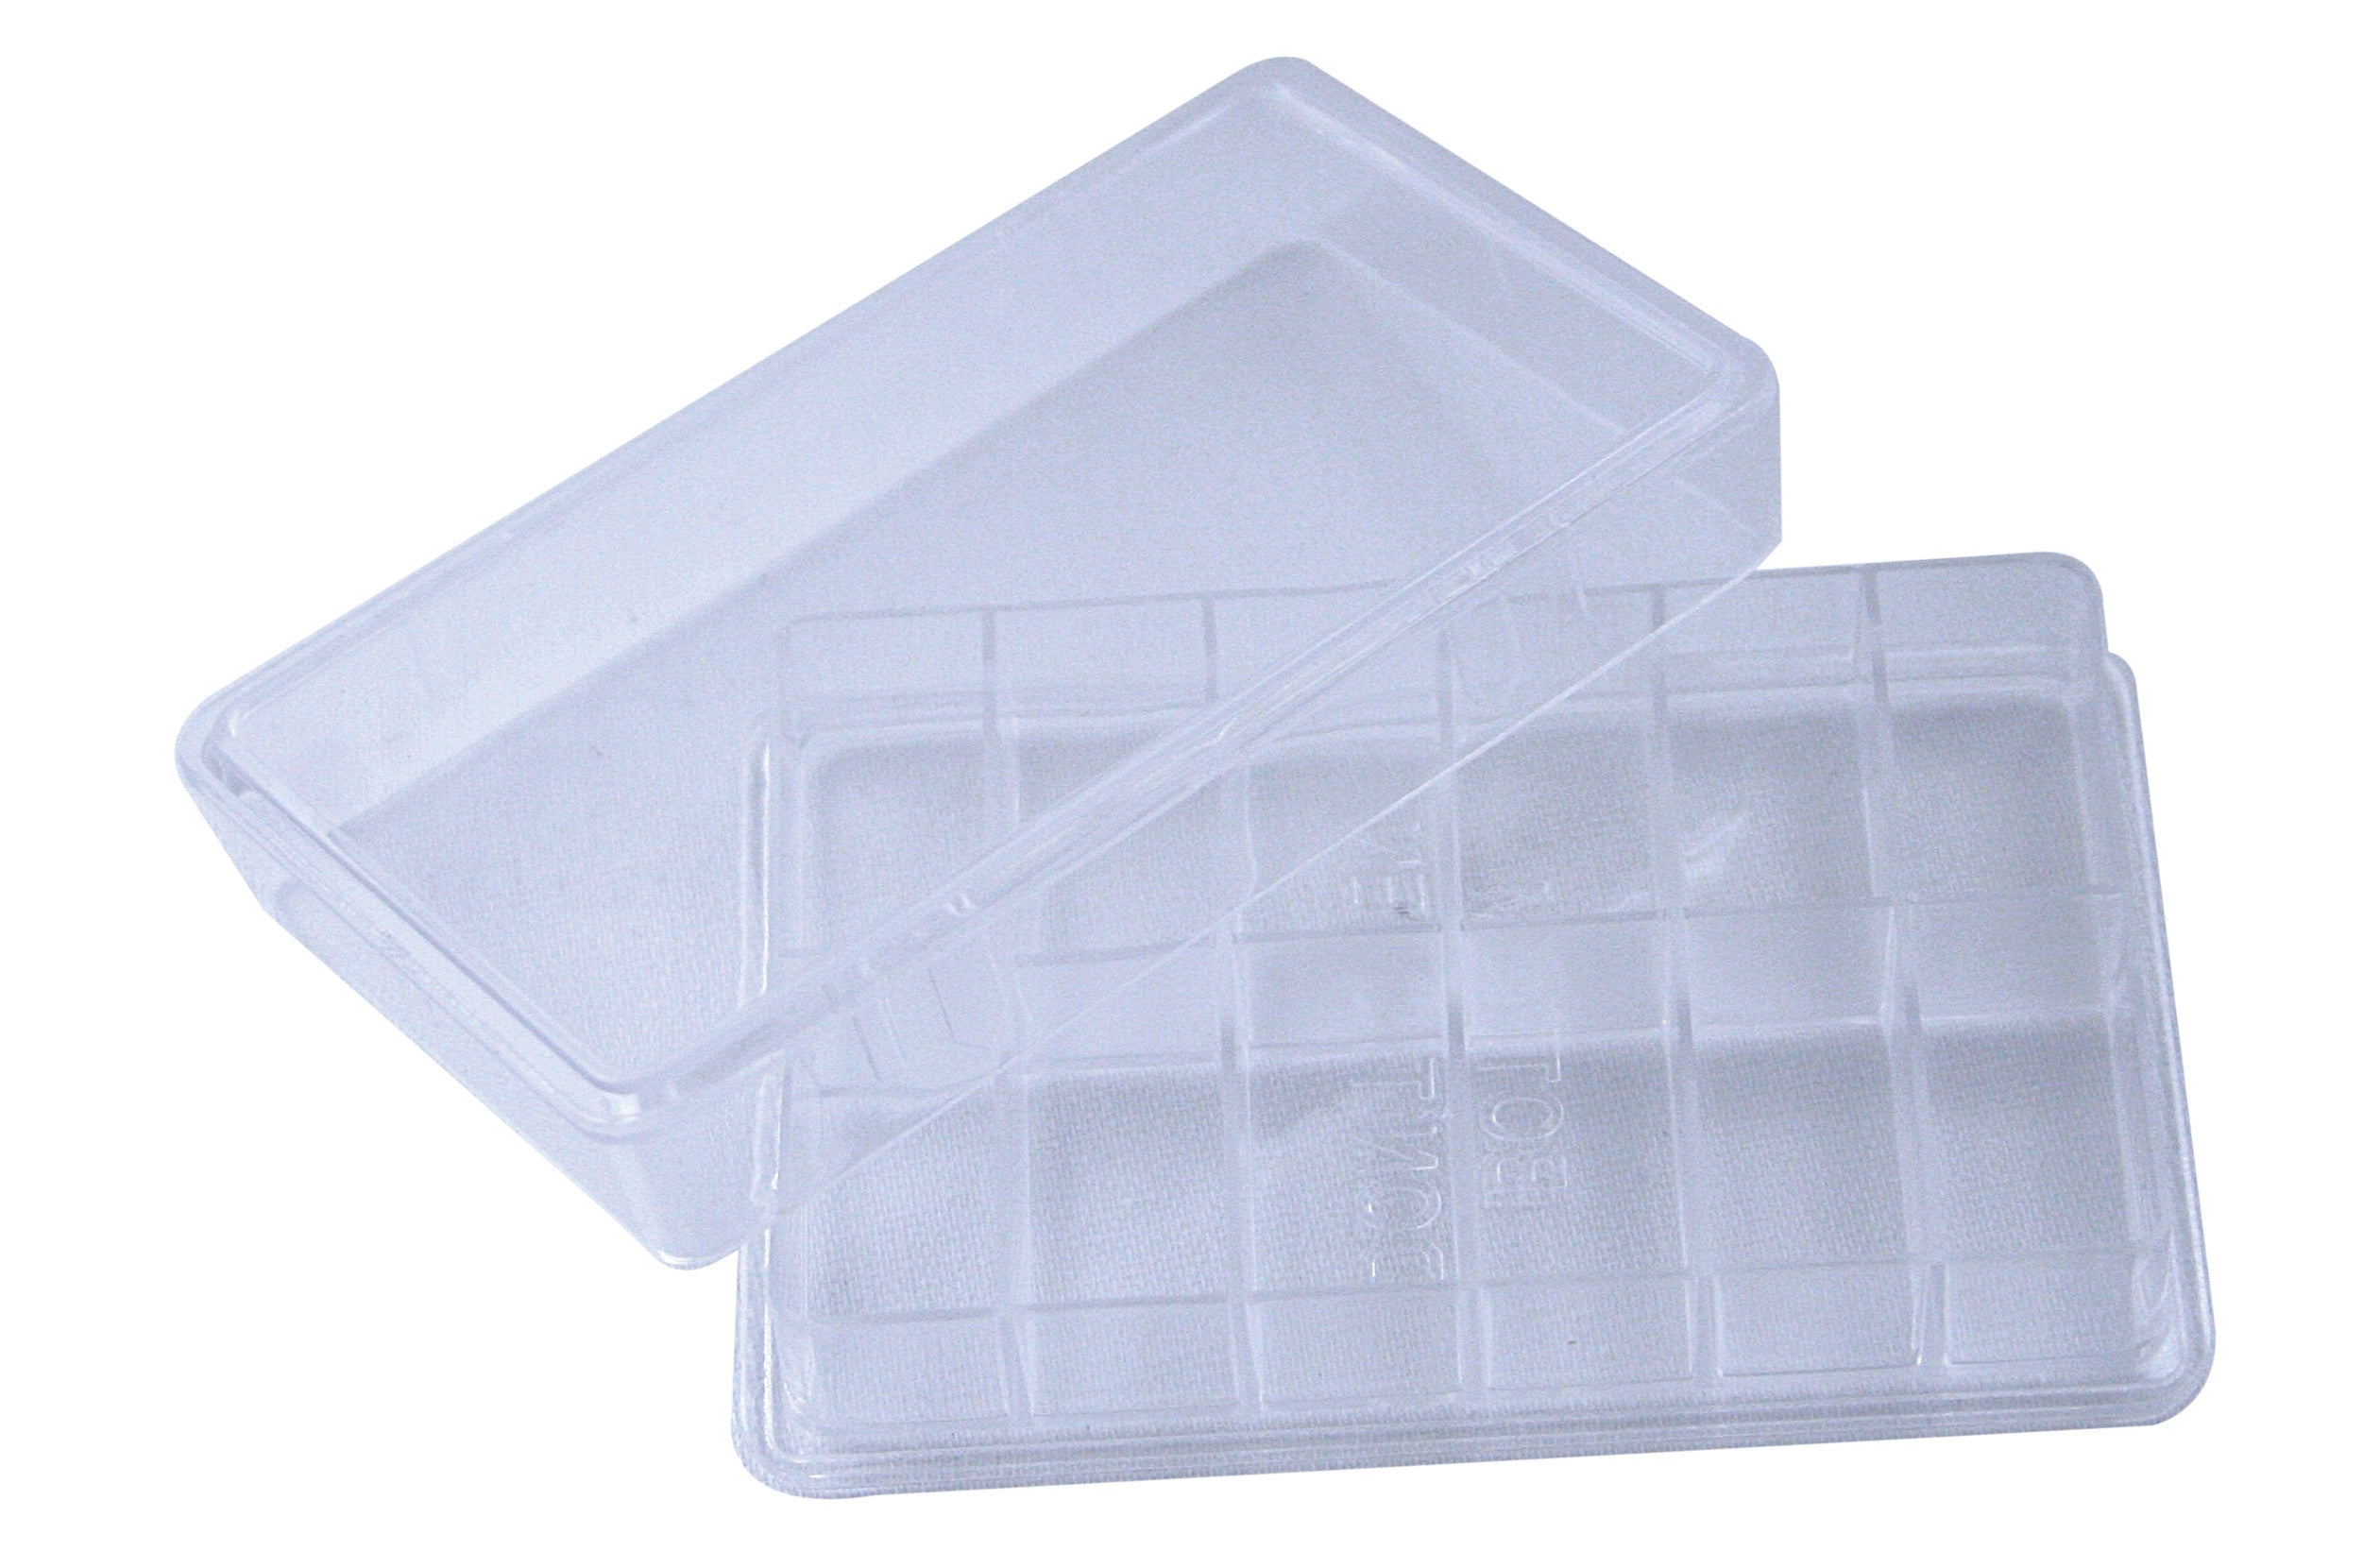 Small Parts Trays with Compartments